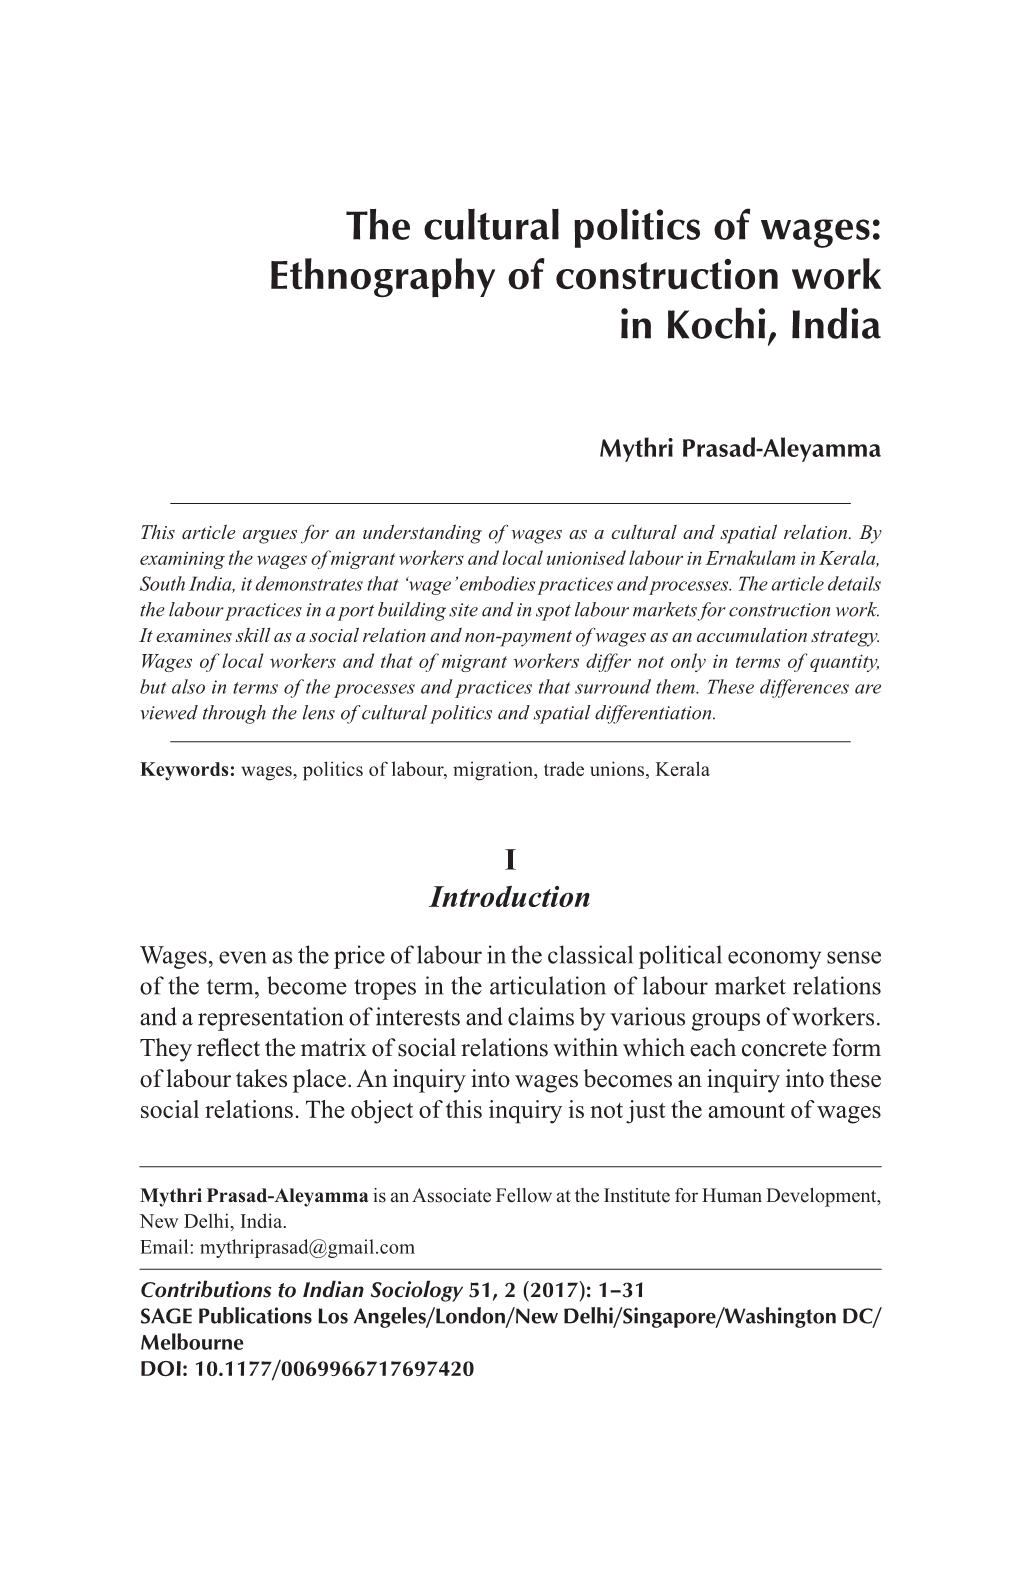 The Cultural Politics of Wages: Ethnography of Construction Work in Kochi, India